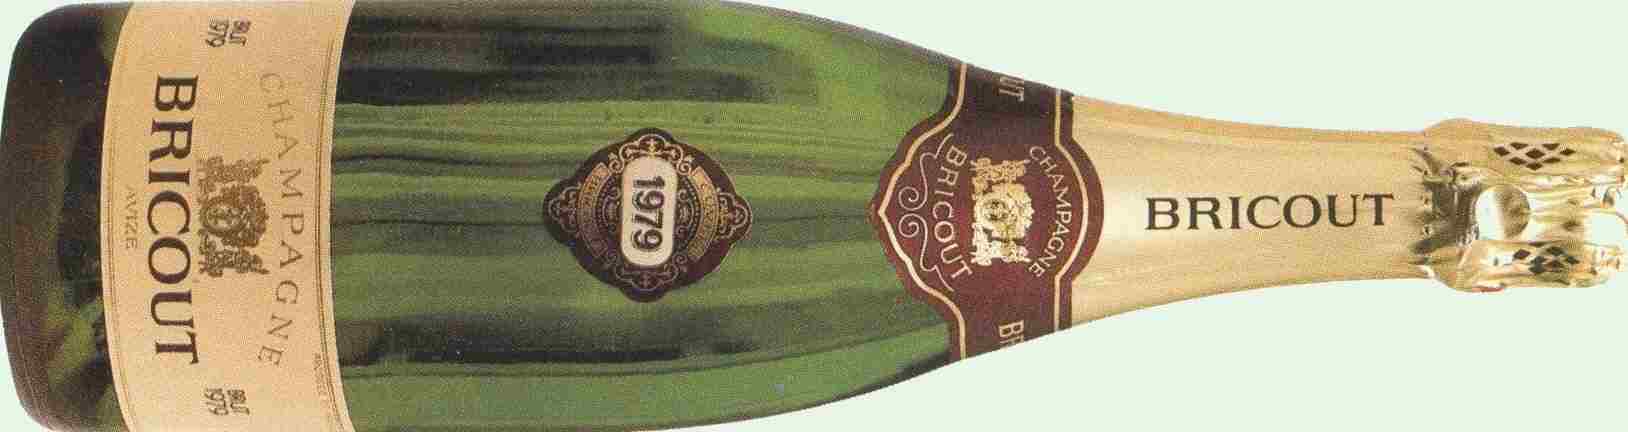 history of champagne Bricout founded in 1966 ------> 